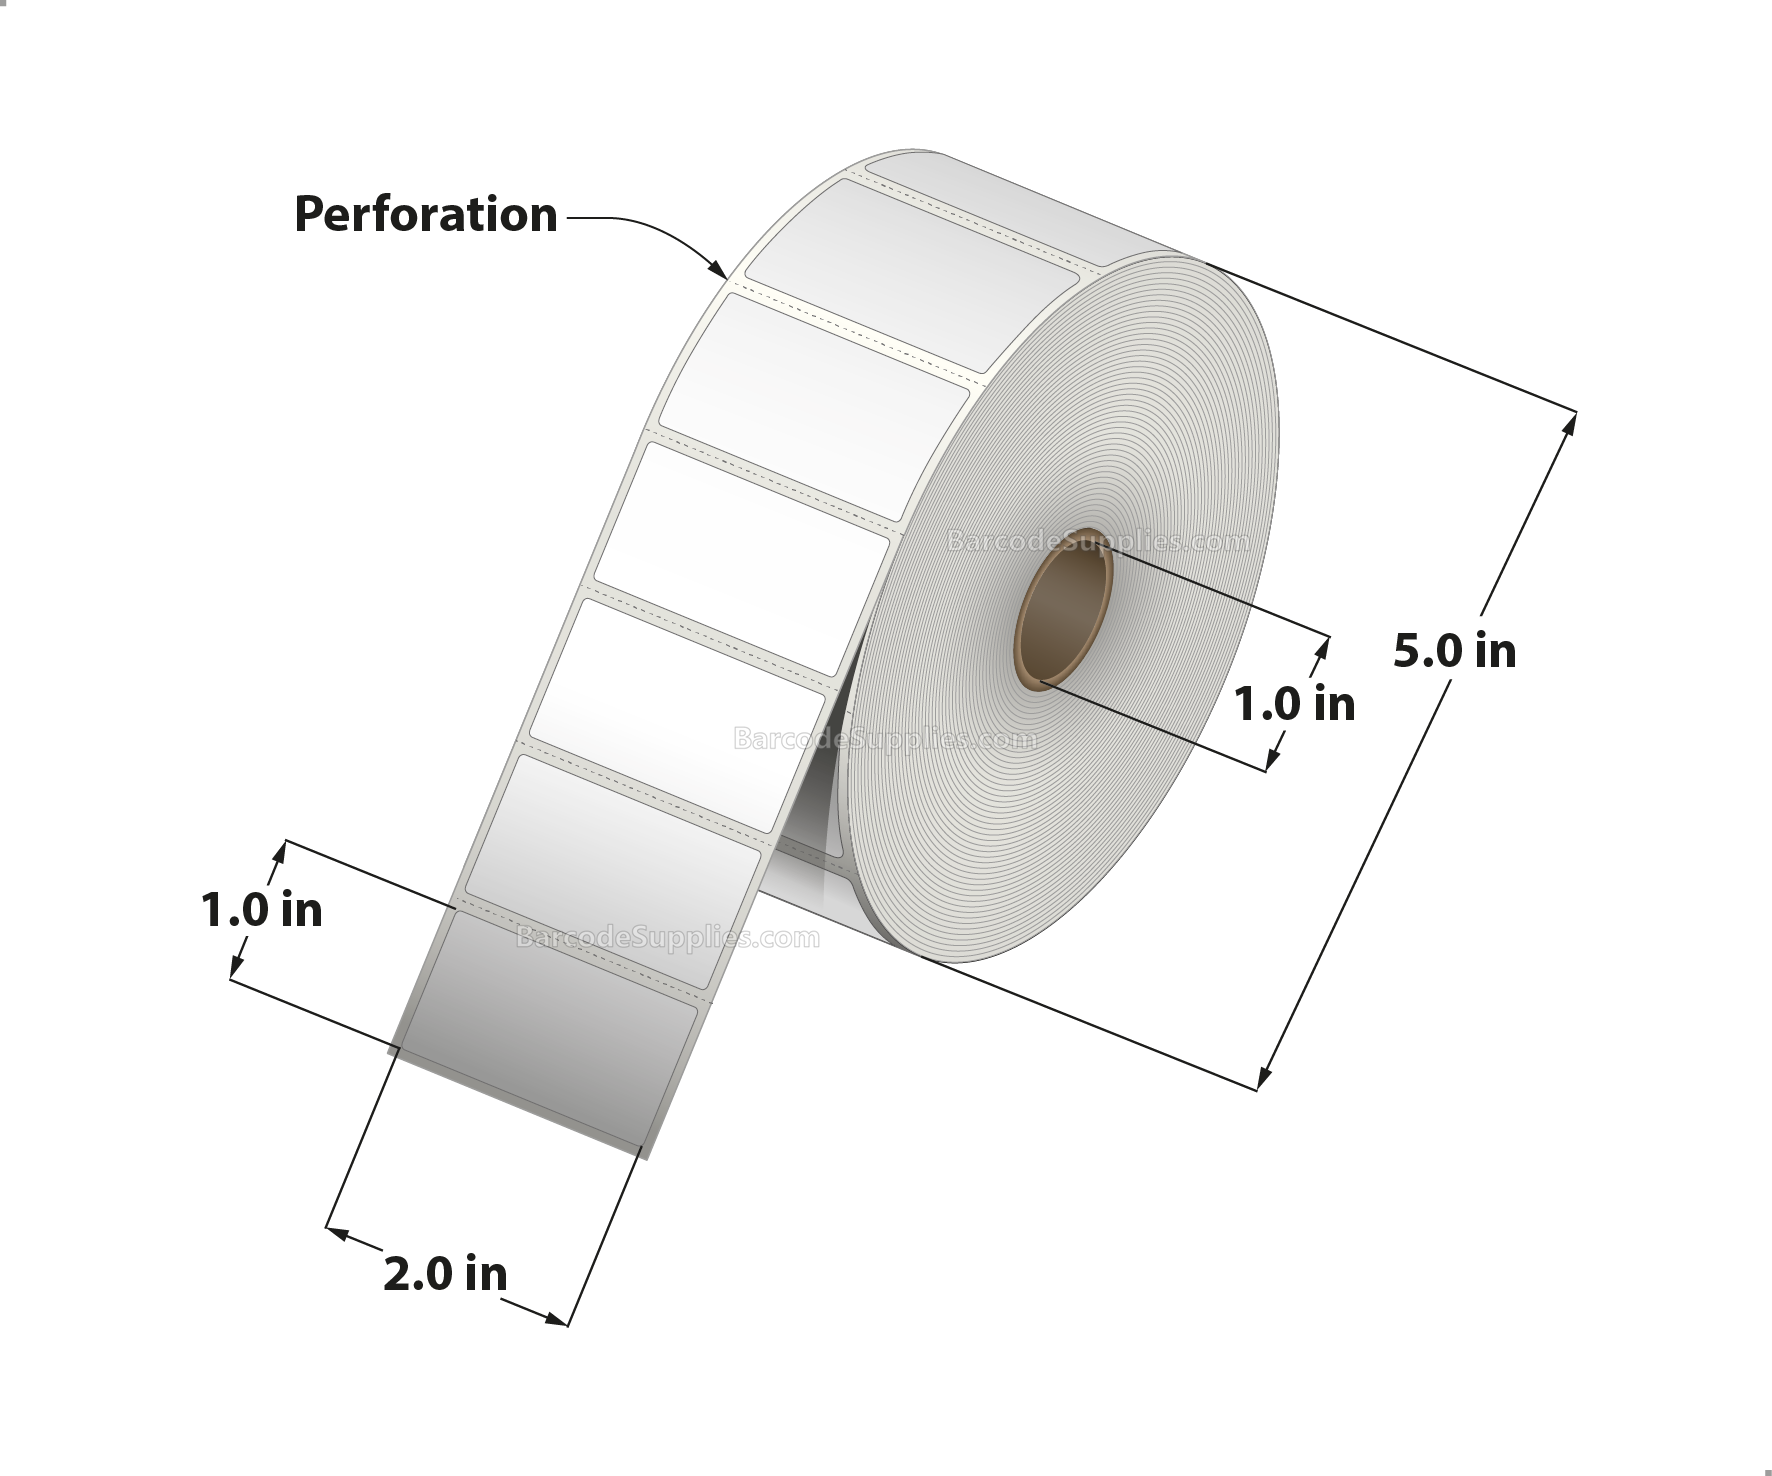 2 x 1 Direct Thermal White Labels With Rubber Adhesive - Perforated - 2340 Labels Per Roll - Carton Of 12 Rolls - 28080 Labels Total - MPN: RDT5-200100-1P